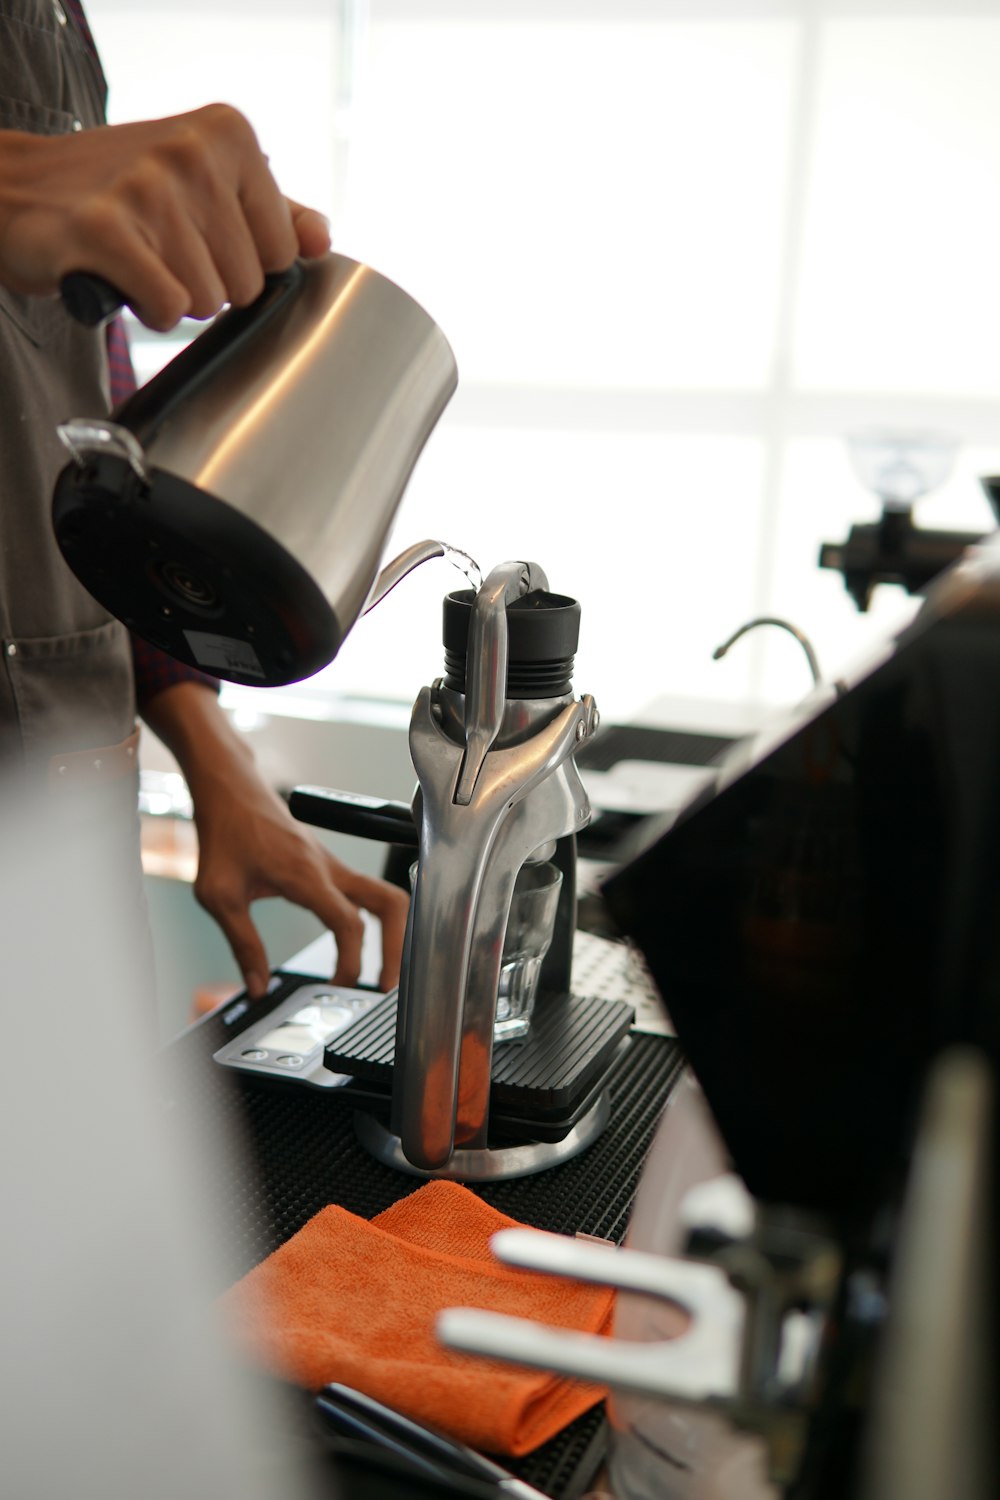 a person pours a cup of coffee from a coffee maker